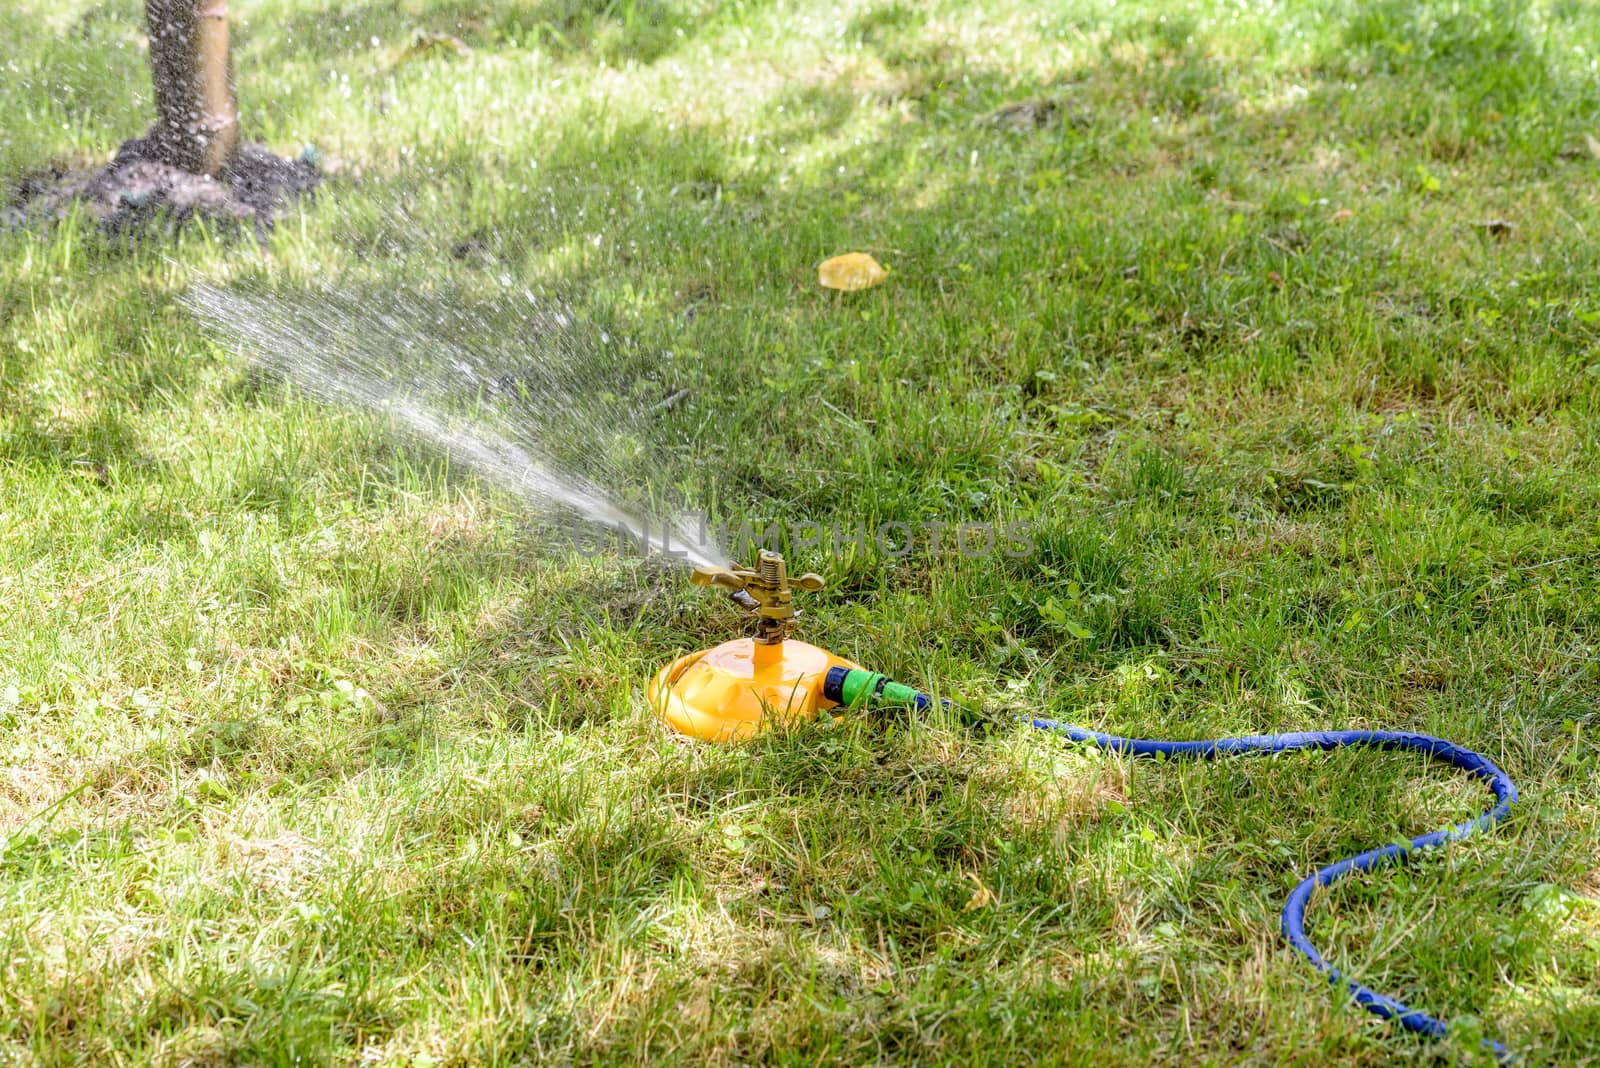 Automatic garden hose with sprinkler spraying fresh water on the lawn duding a warm summer day